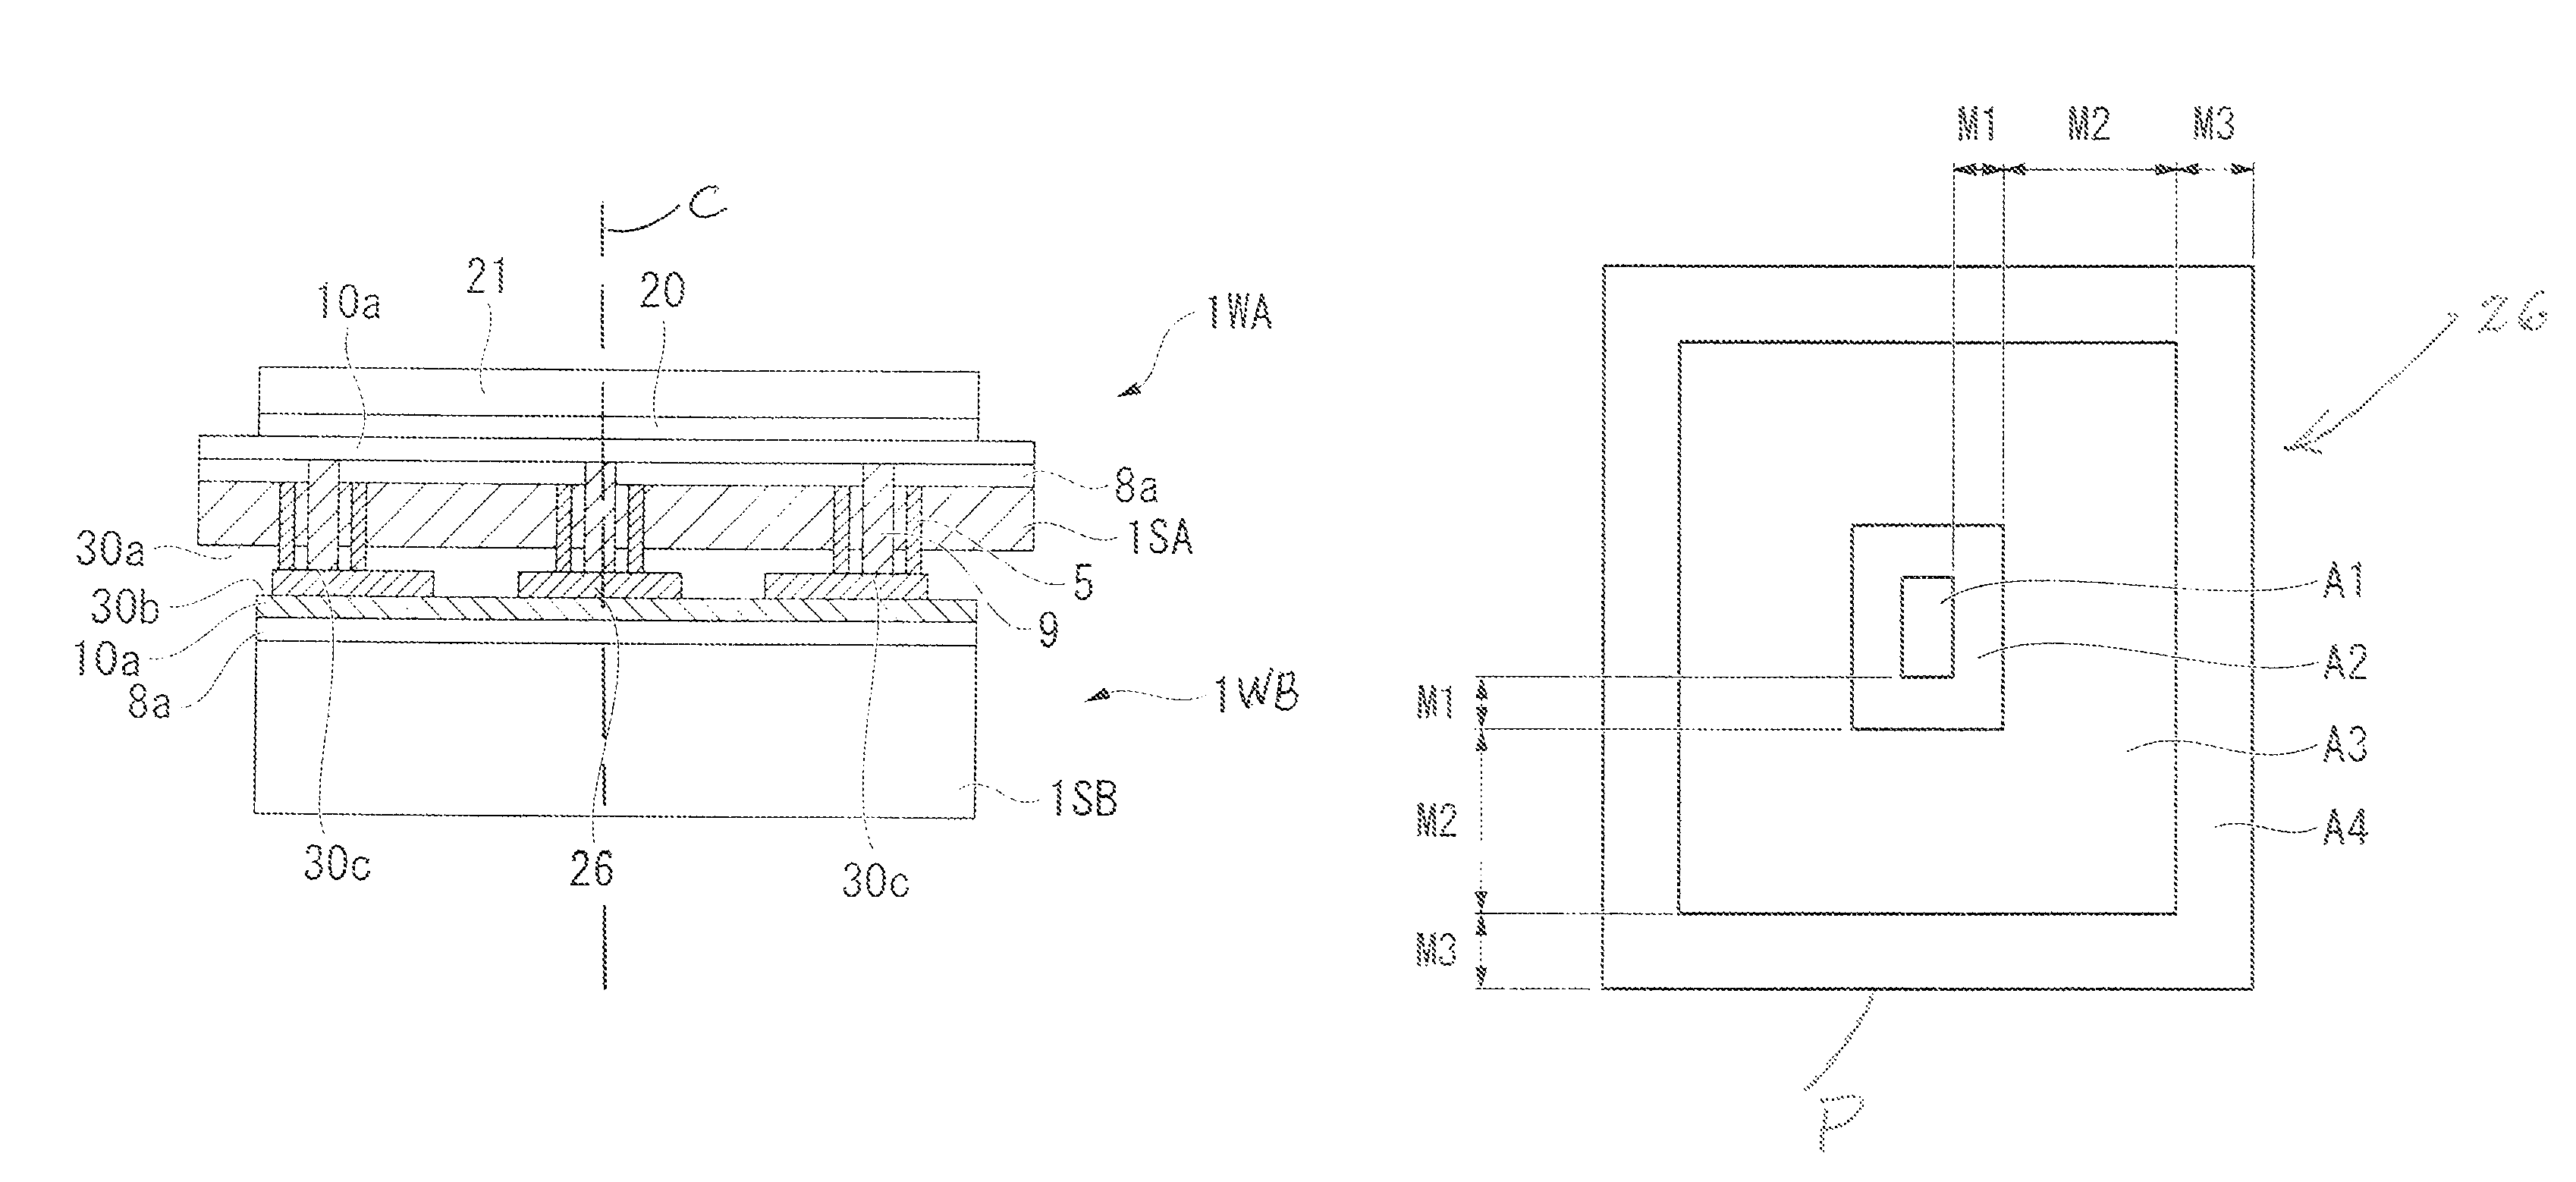 Semiconductor device having an increased area of one of the opposing electrode parts for preventing generation of unconnected positions the electrodes on the bonded wafers